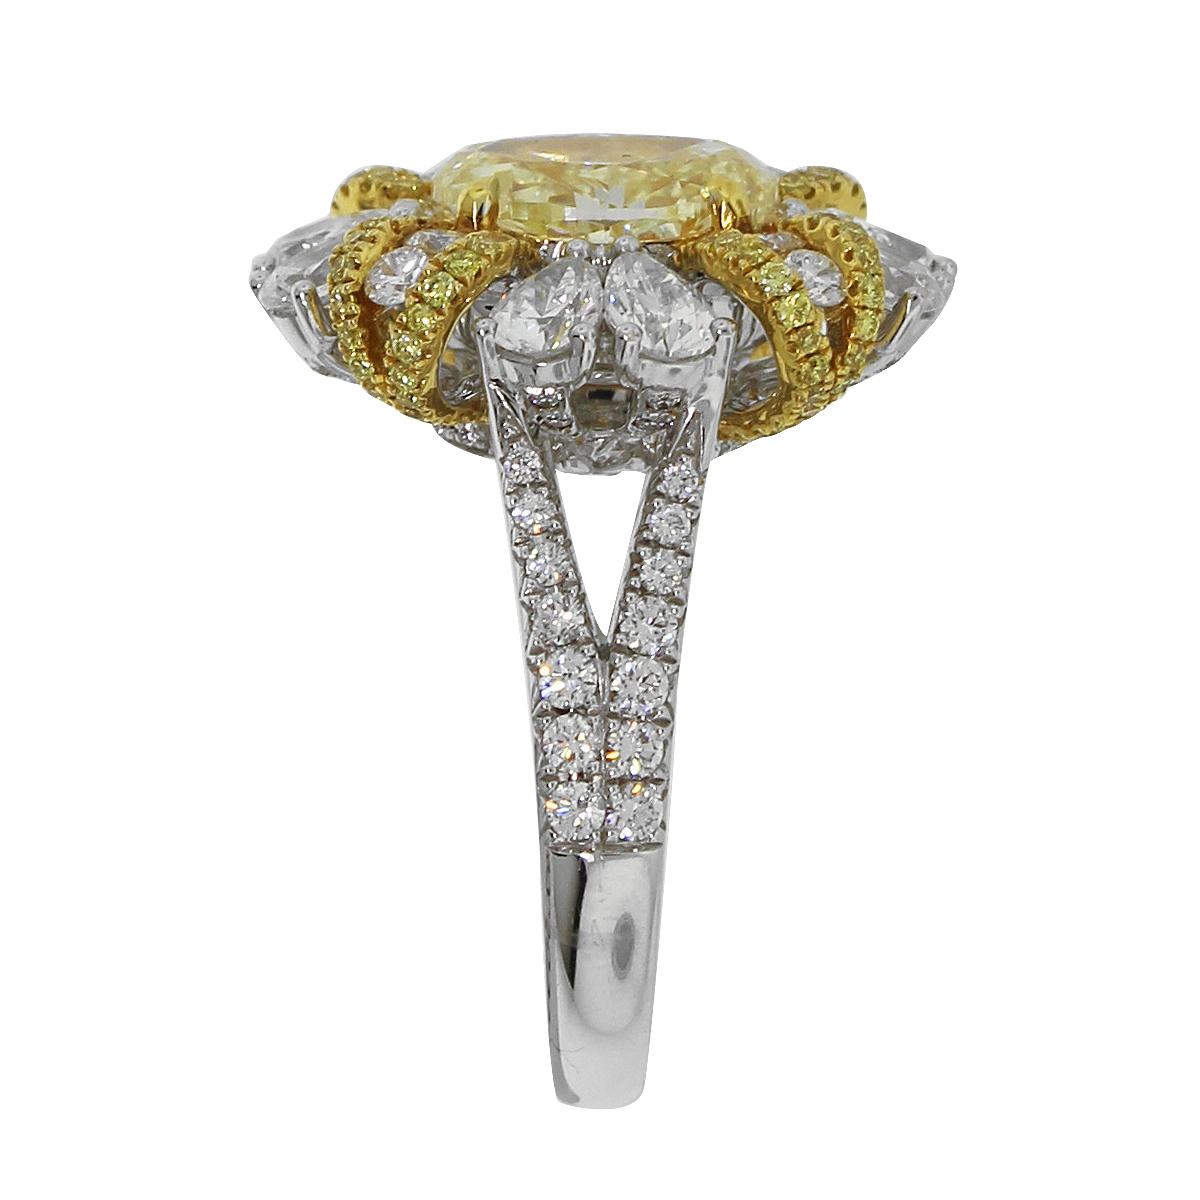 Material: 18k White Gold 
Diamond Details: Approximately 2.37ctw accent diamonds. Diamonds are G/H in color and VS in clarity.
Gemstone Details: Oval shape fancy yellow diamond. Approximately 2.48ct. GIA: 3205401396
Ring Size: 6.5
Total Weight: 9.9g